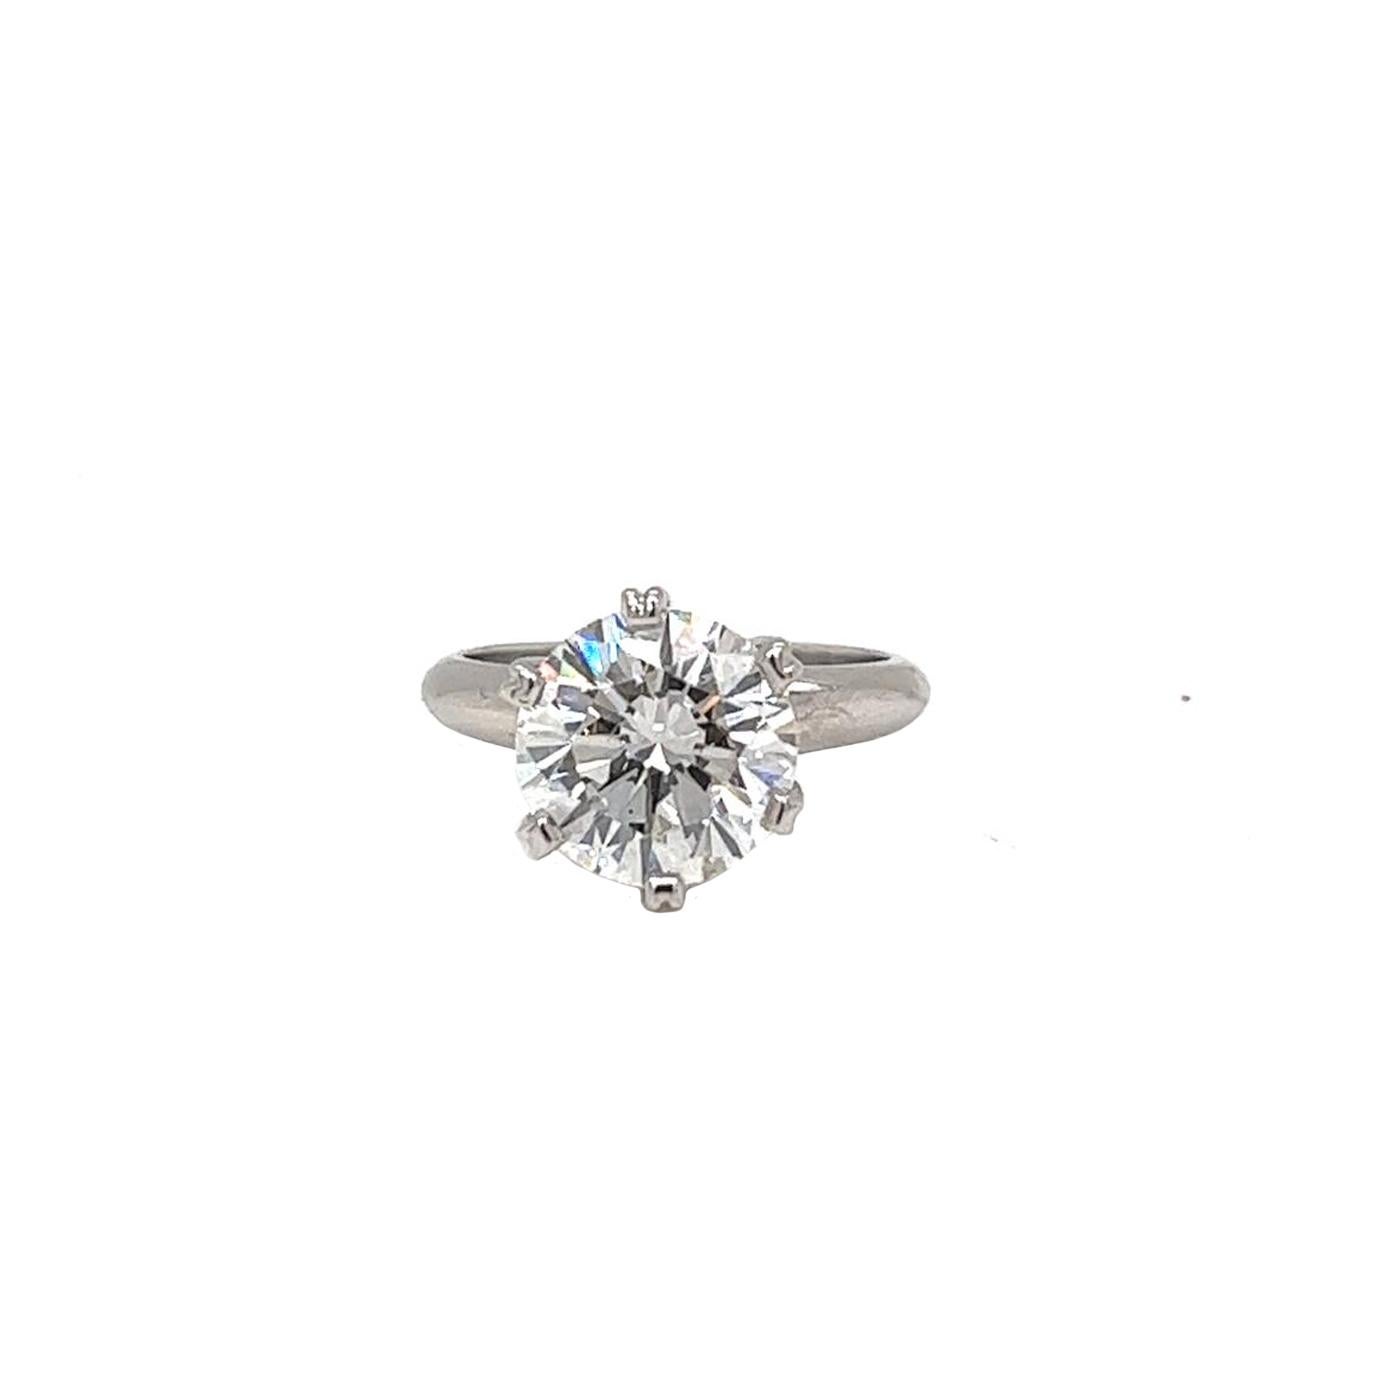 Modernist 3.10ct Natural Round Diamond Solitaire Ring 6 Prong 14K White Gold Si2 Clarity For Sale